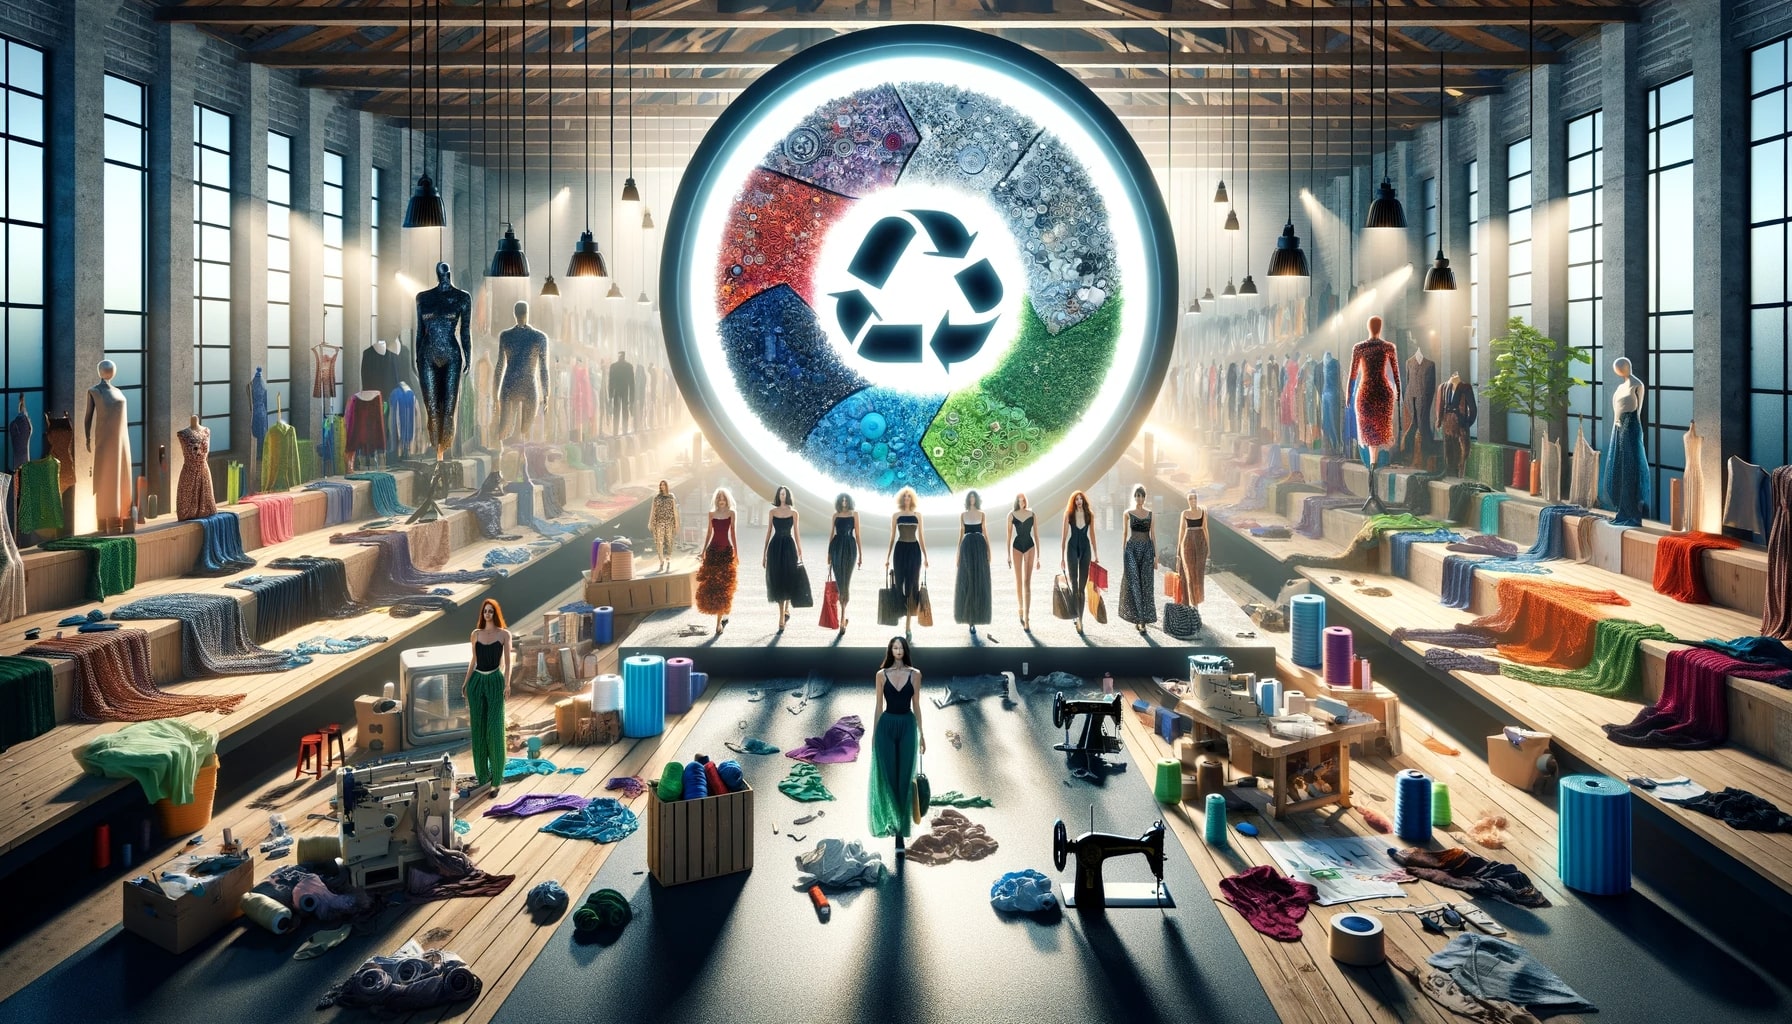 Image representing "Circular Economy in Fashion", capturing the essence of sustainable production and recycling strategies in the fashion industry.